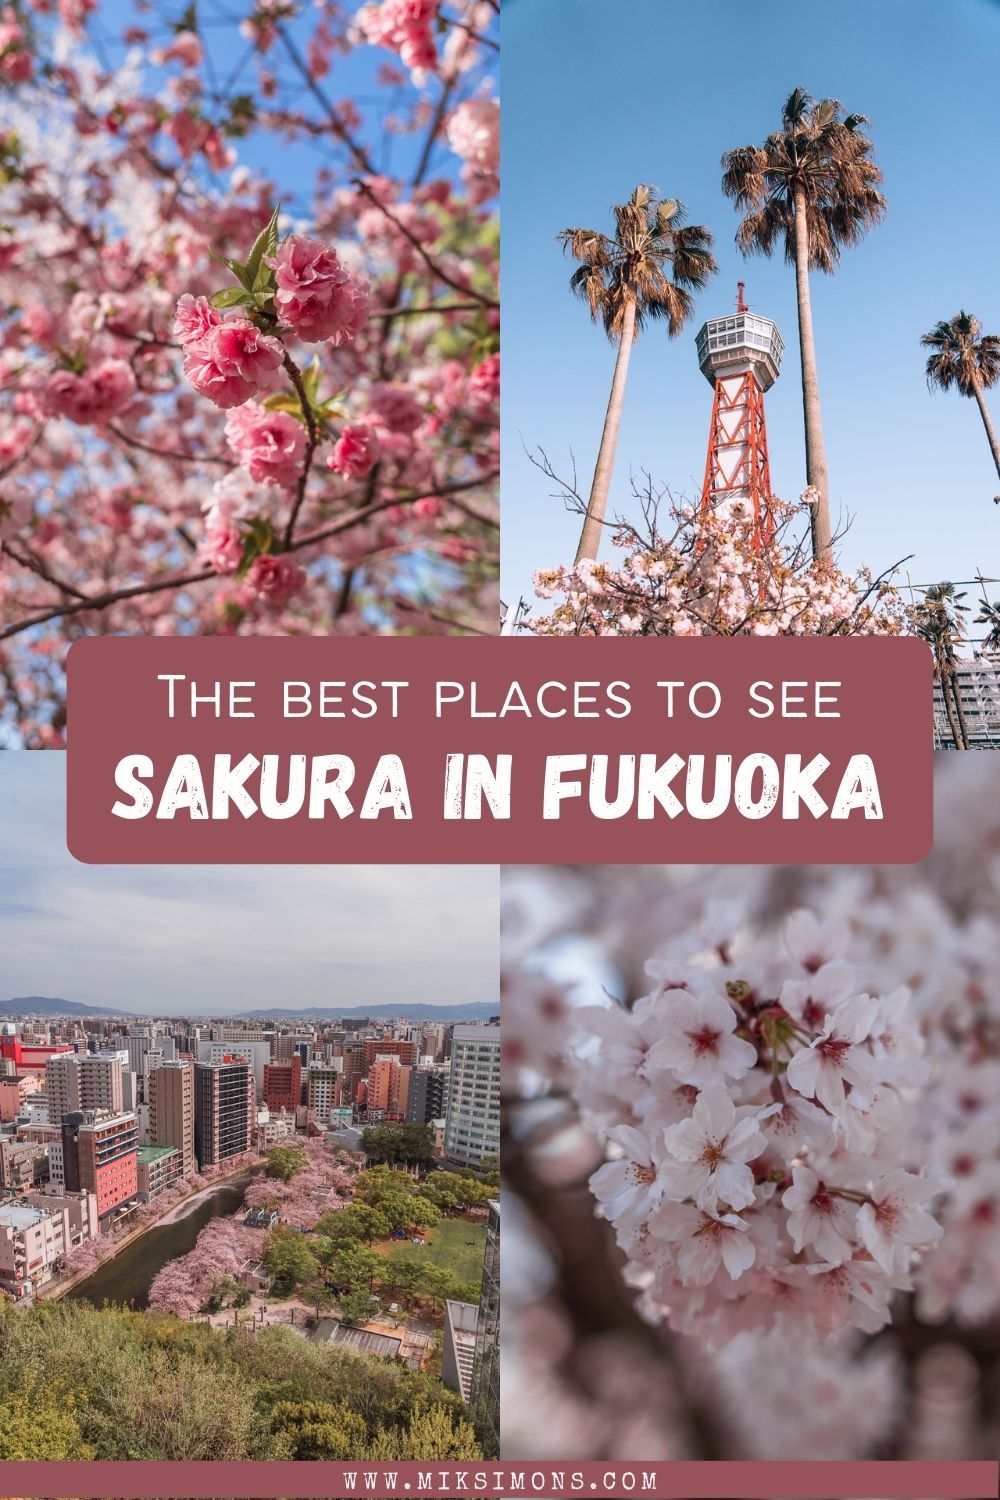 9 x the best places to see cherry blossoms in Fukuoka1